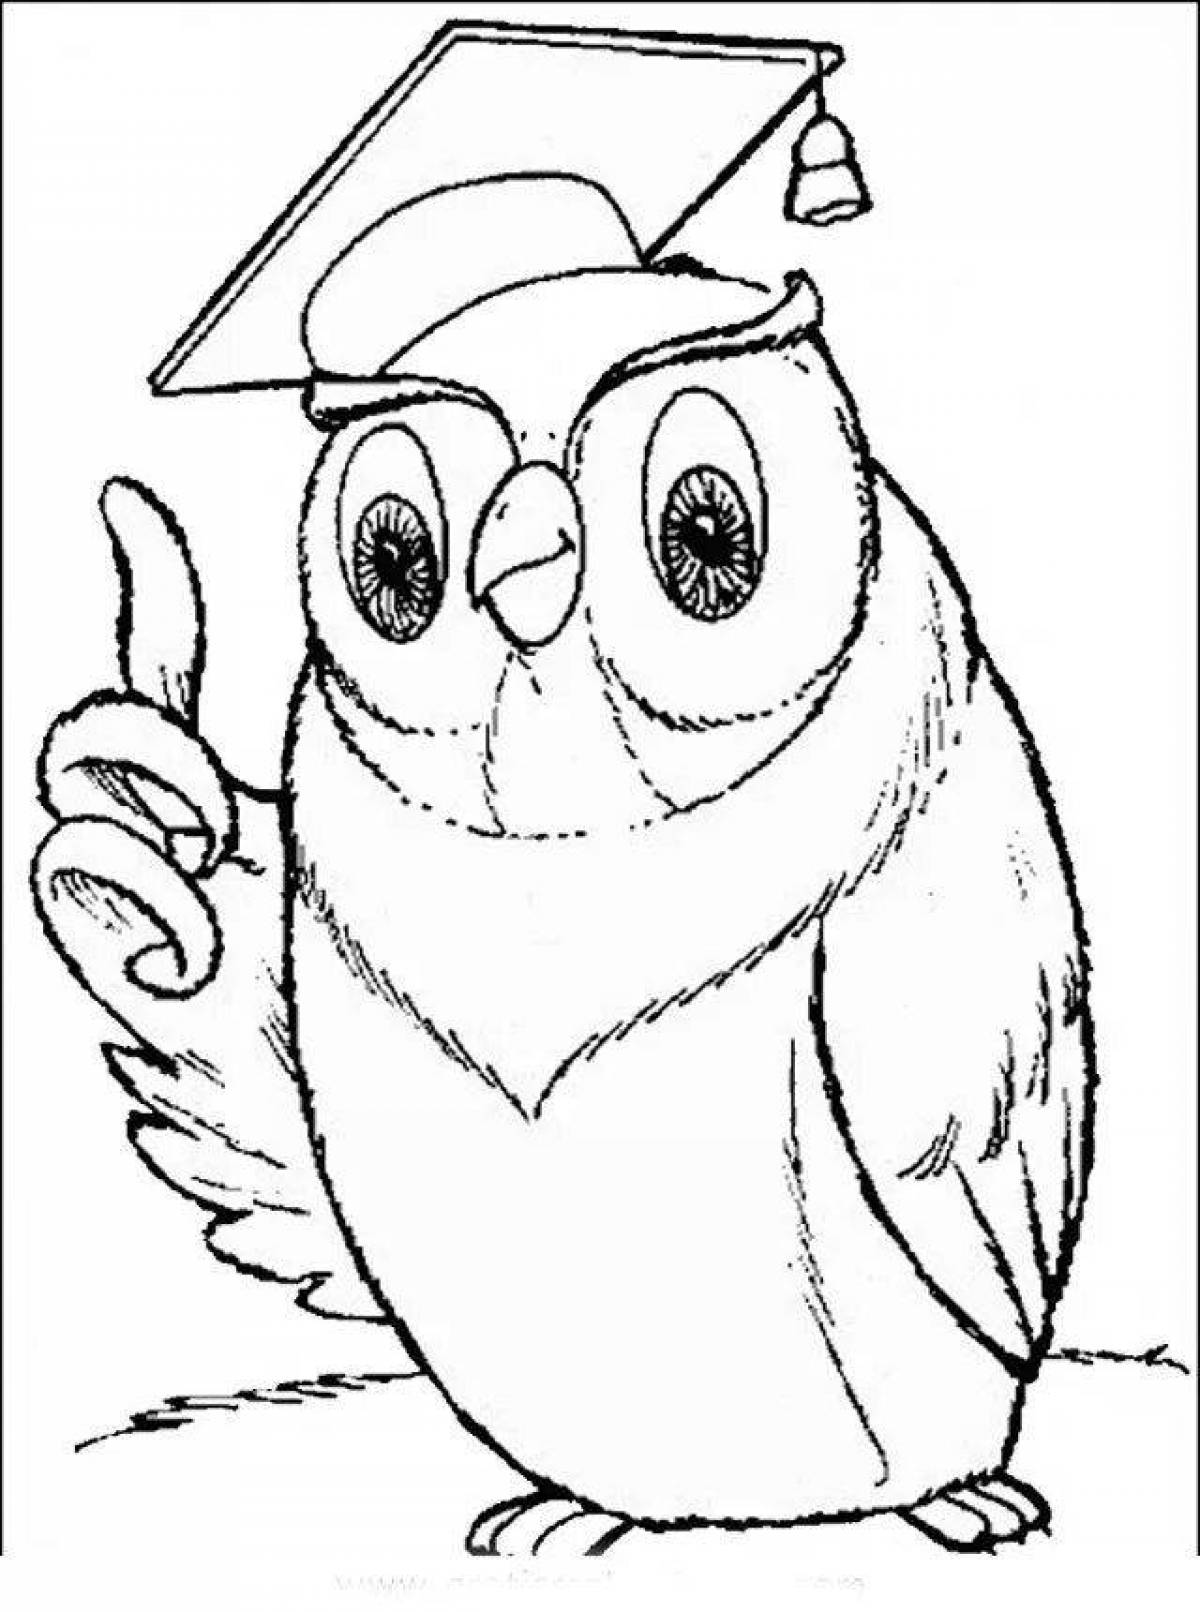 Wise owl coloring book with wise gesture